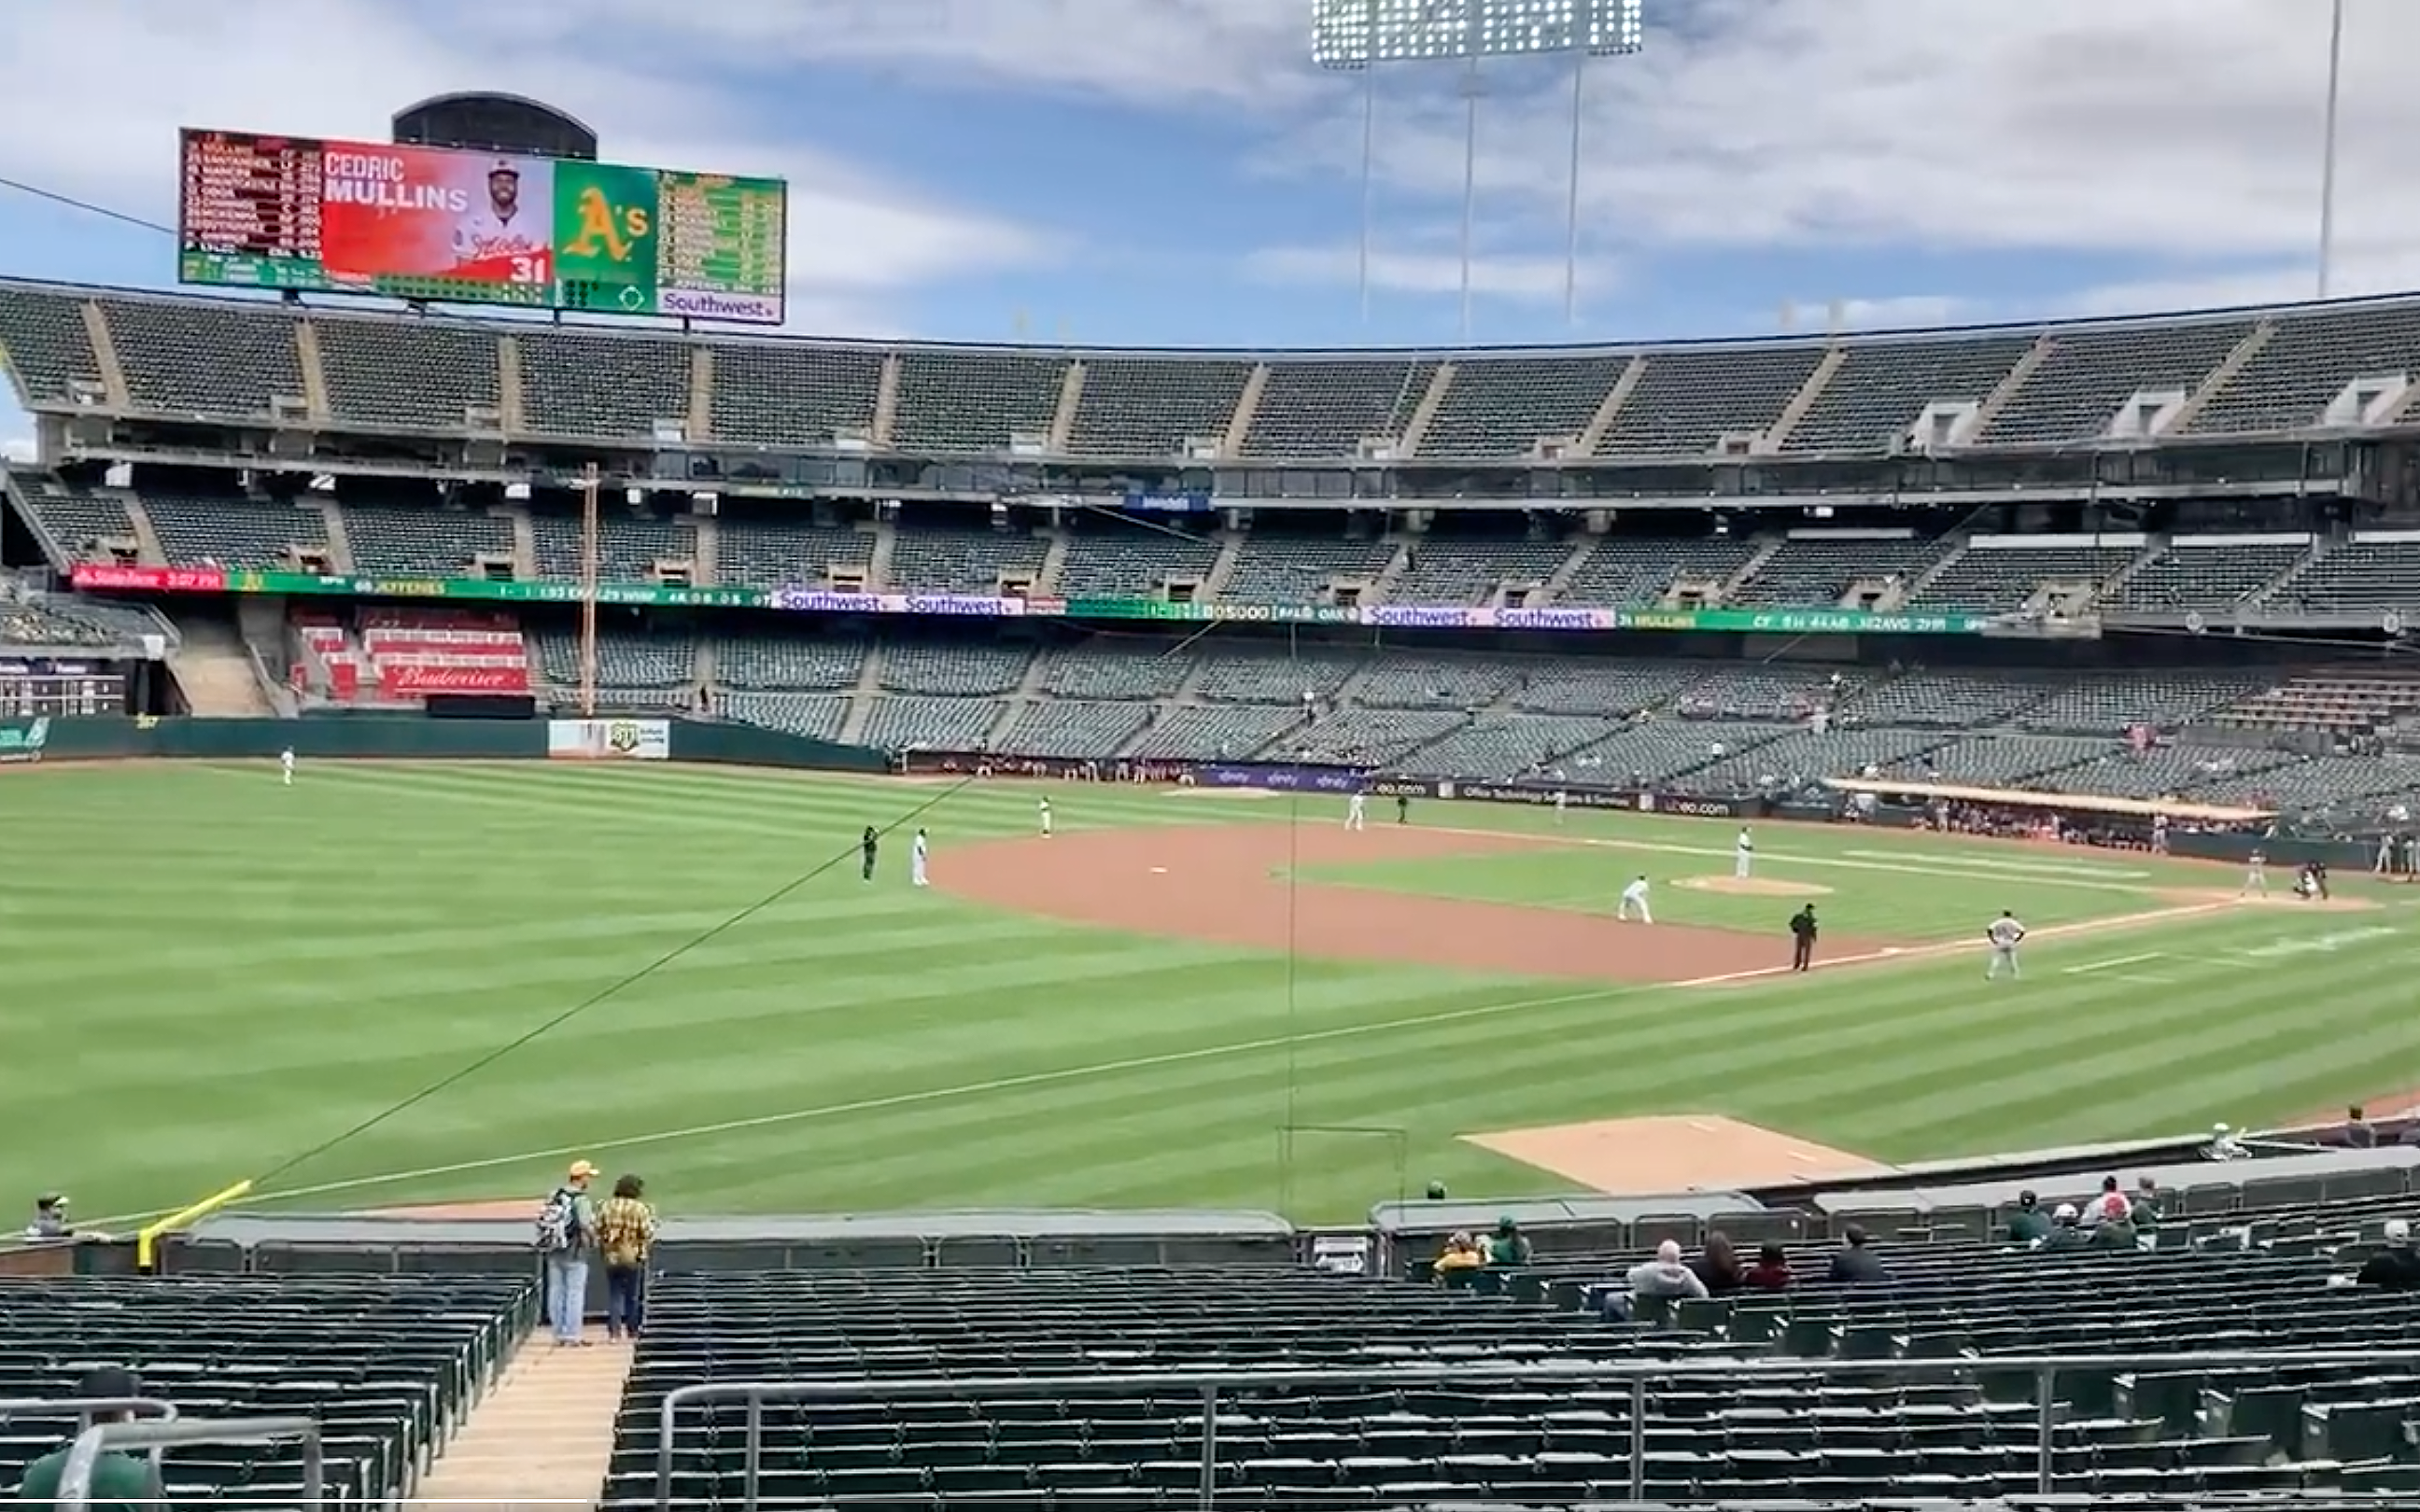 Briggs: Here's what it's like to attend an MLB game in an empty stadium